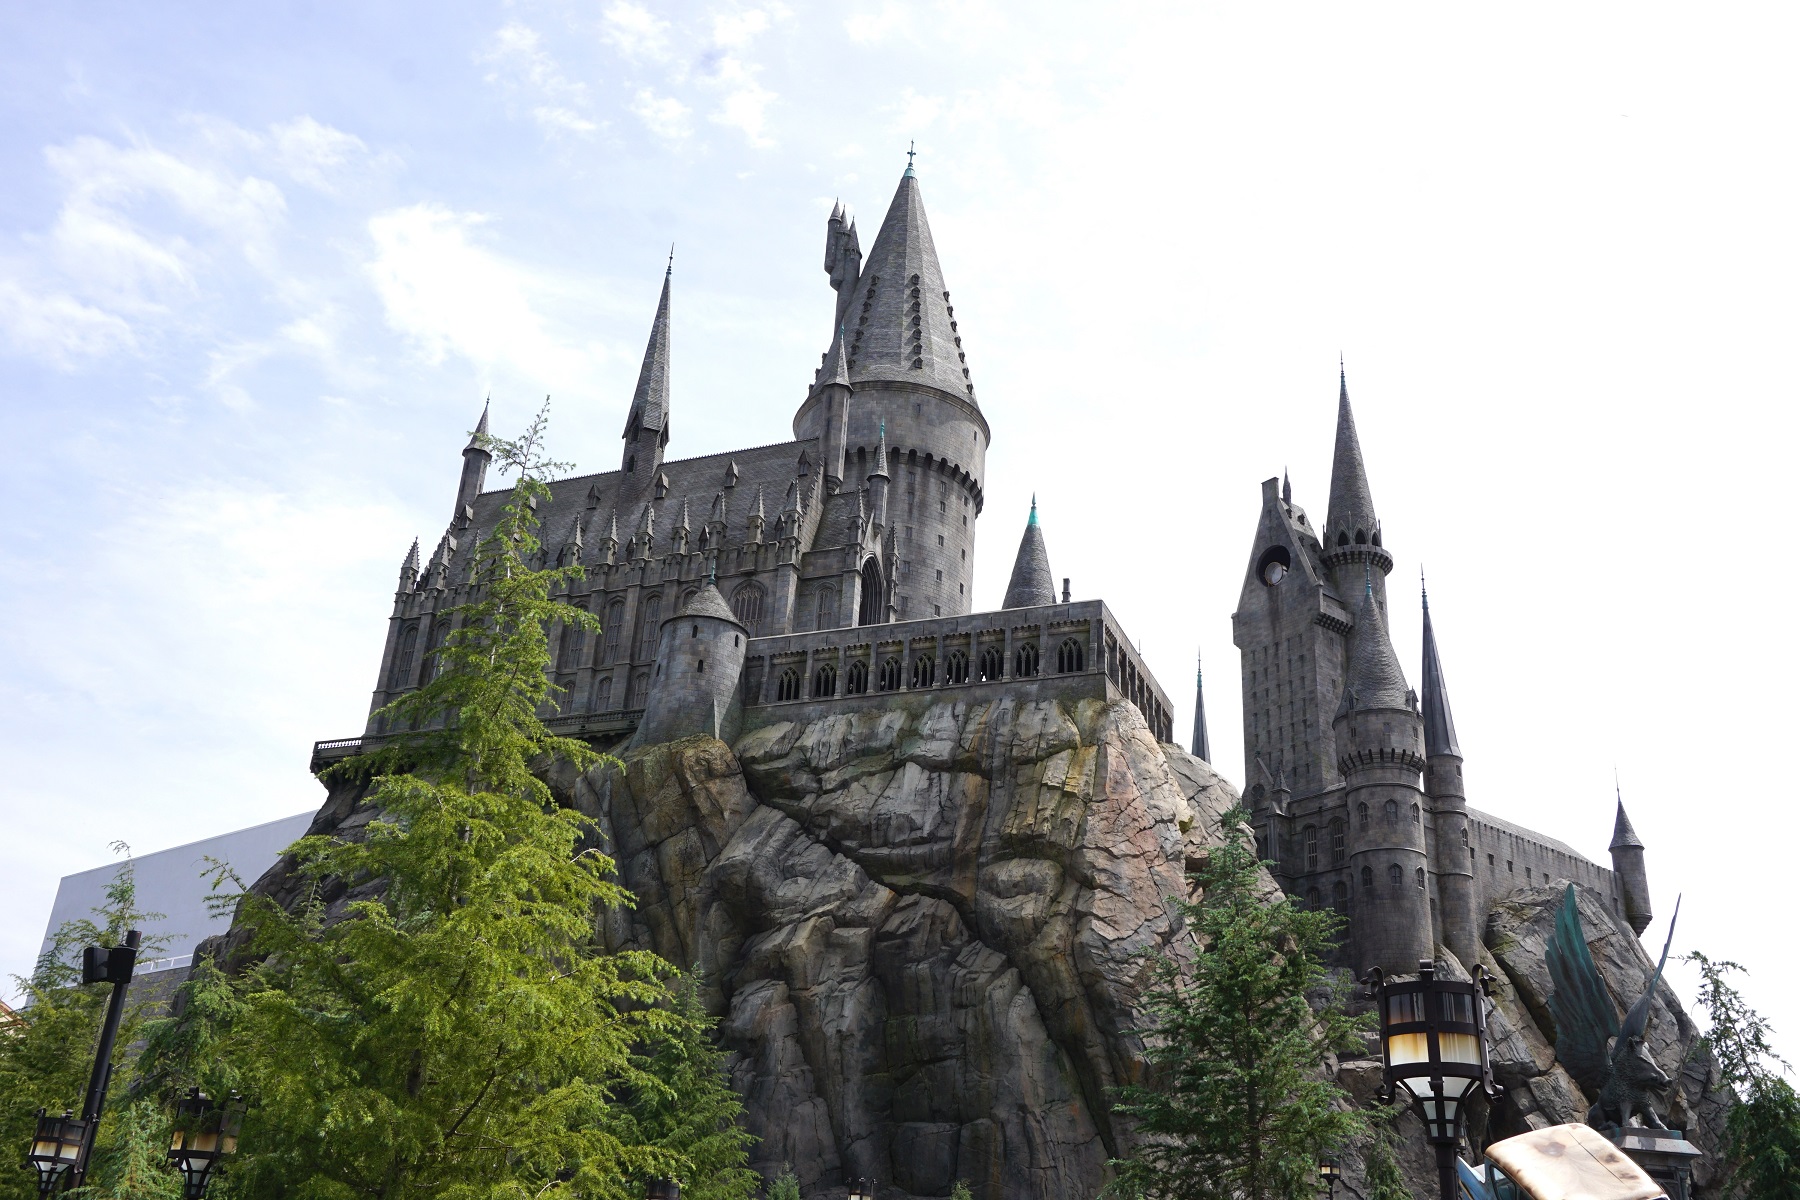 Hogwarts as seen at the Wizarding World of Harry Potter at Universal Studios Hollywood